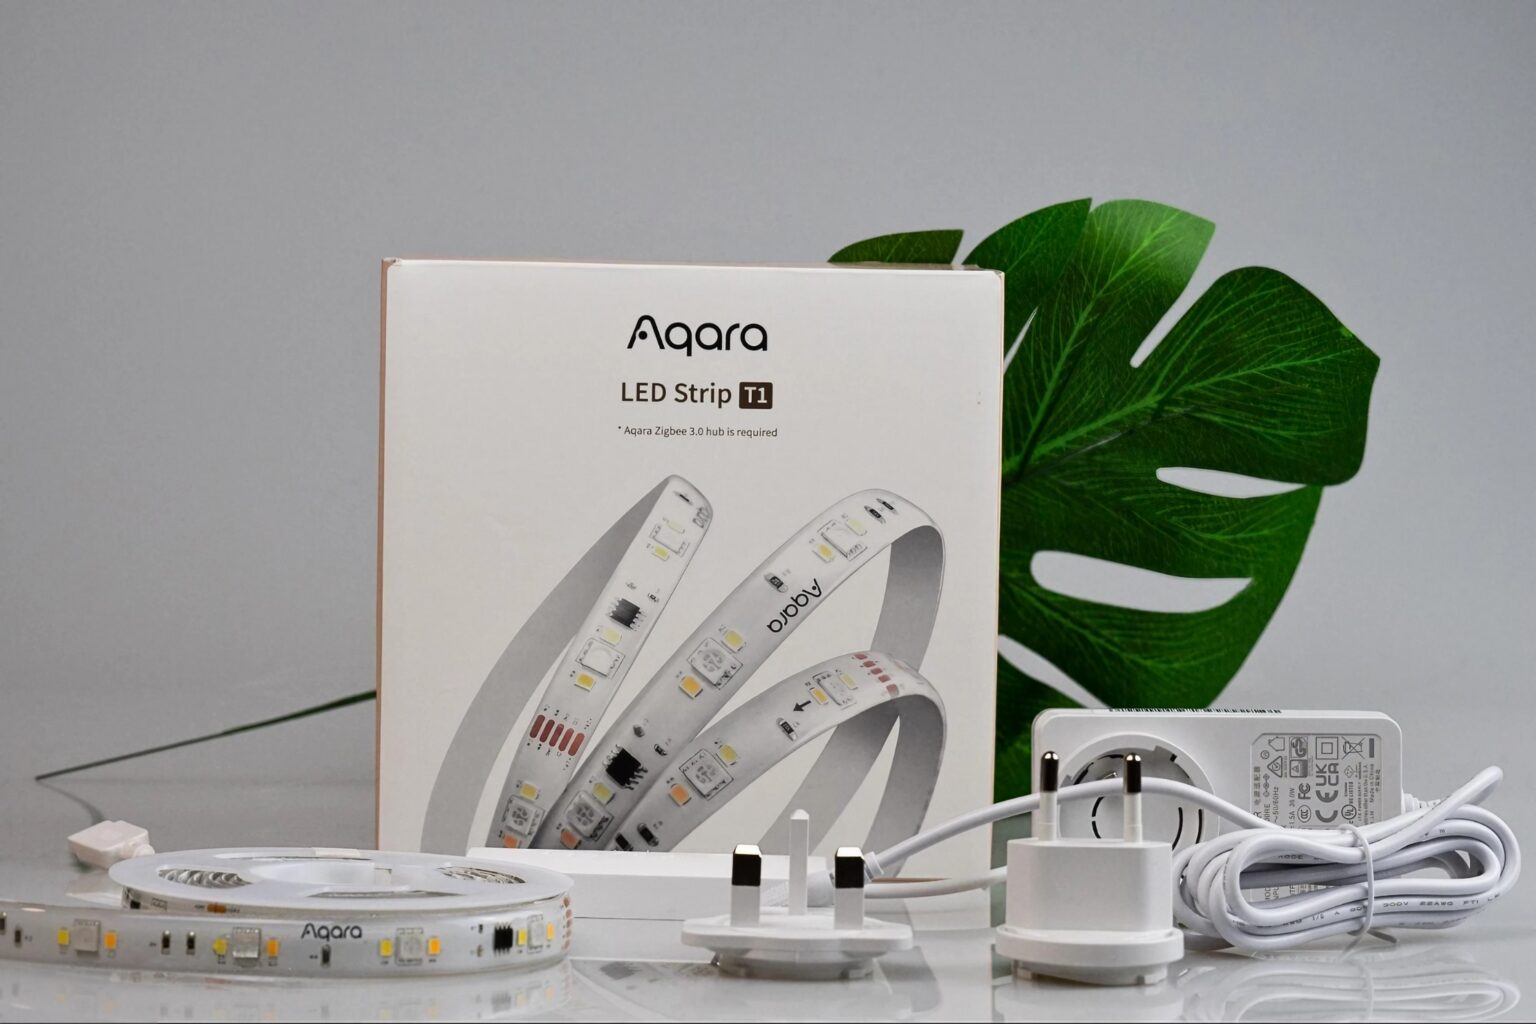 Aqara LED Strip T1 Review: A Home Ambiance Booster